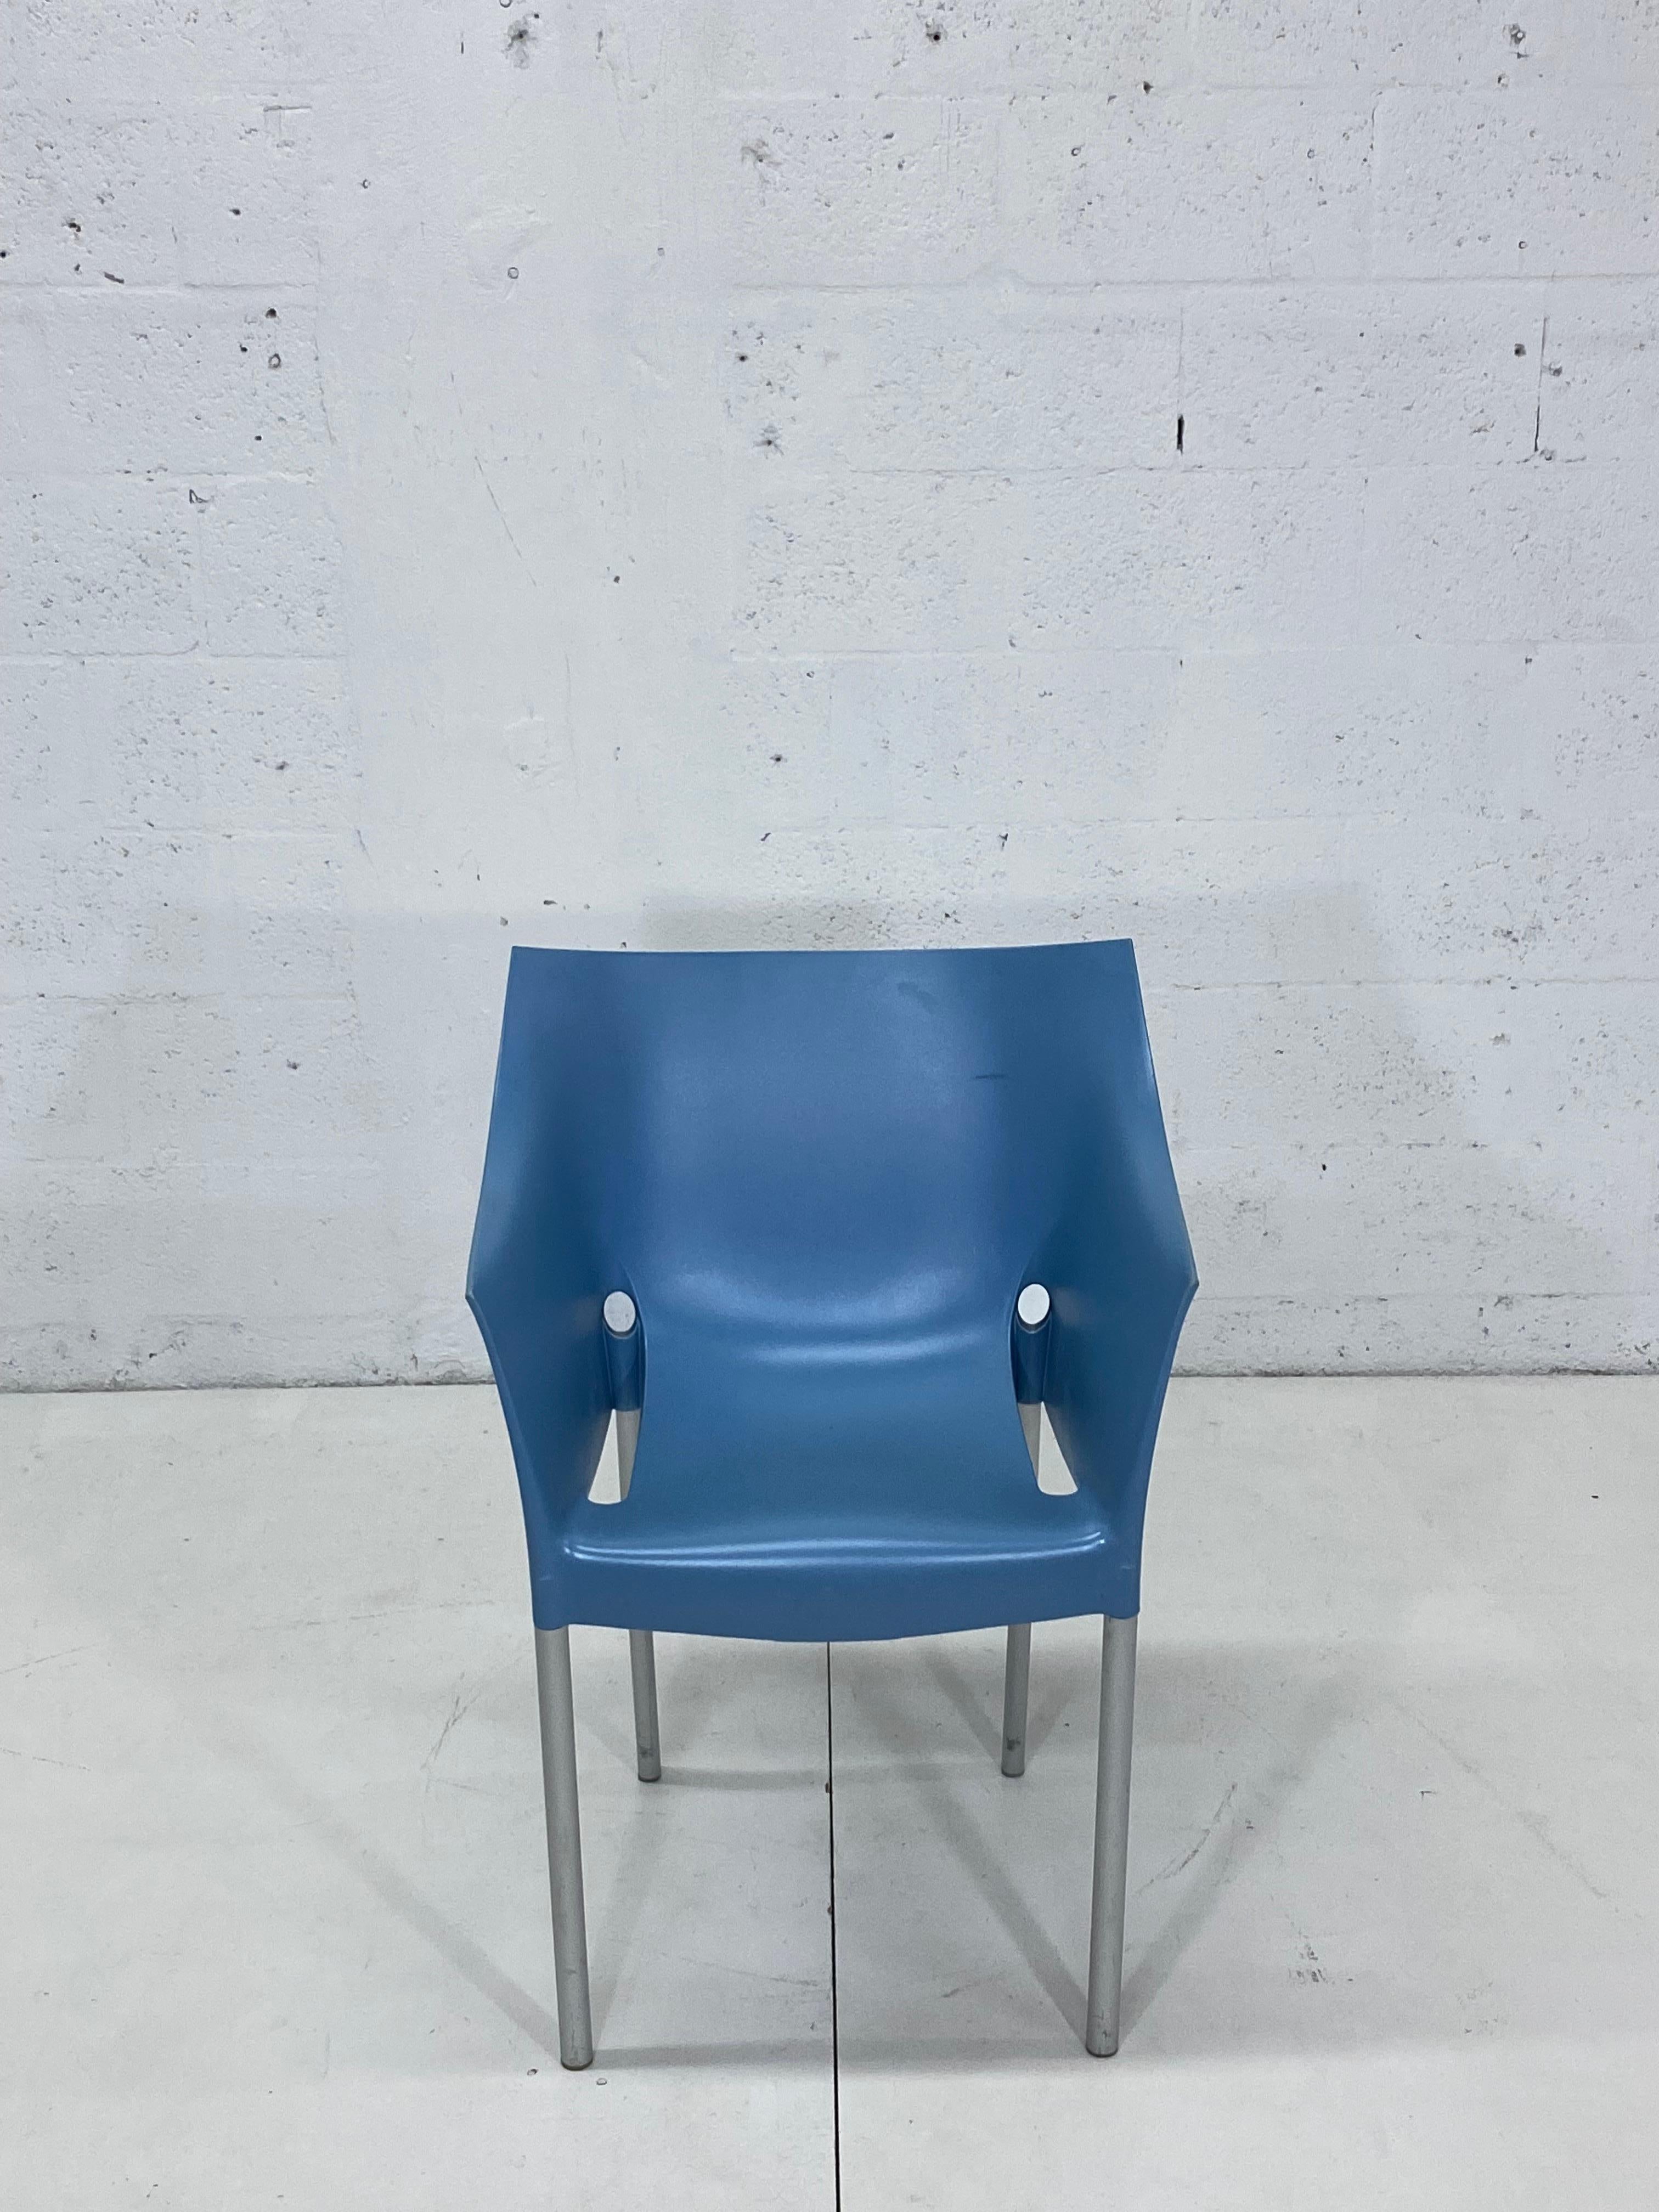 Blue Dr. No chairs with aluminum legs by Philippe Starck and produced by Kartell, Italy. 

Ten available.  Sold individually or as a set in our other listings.